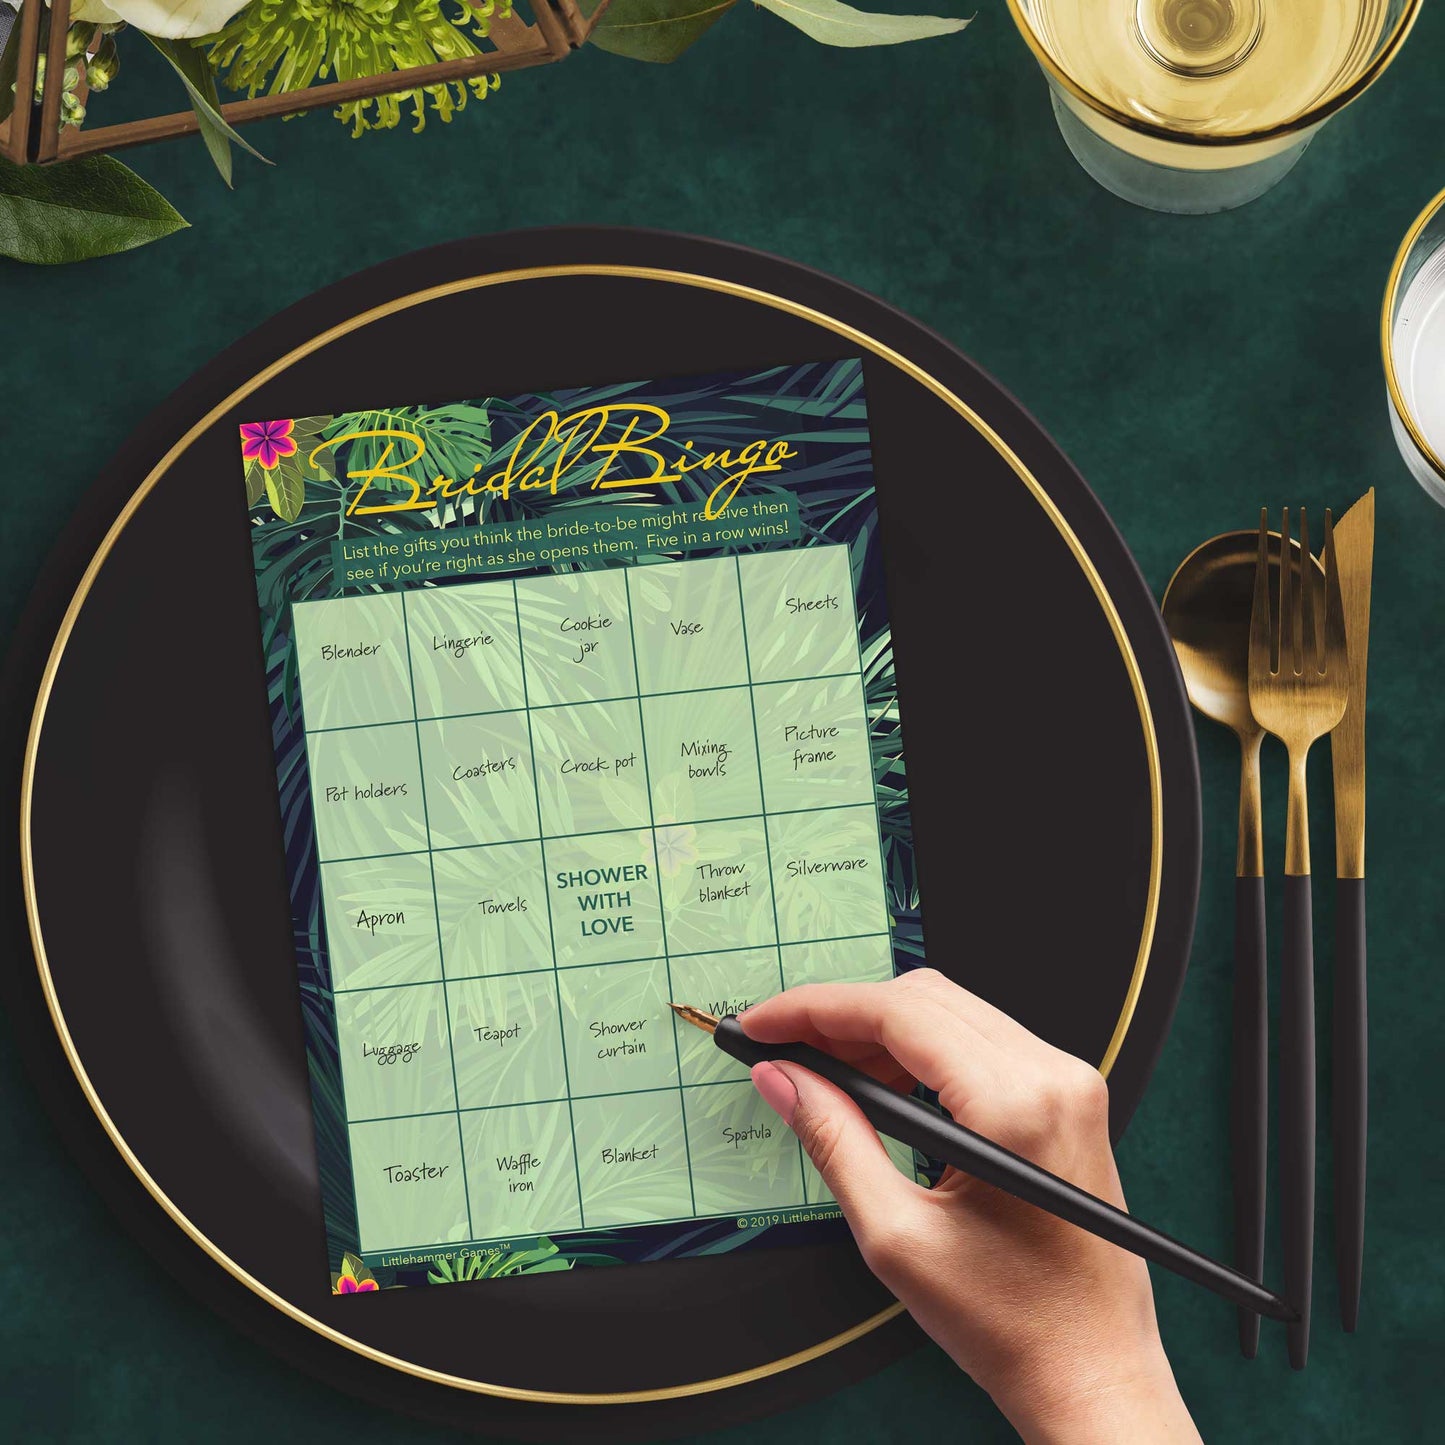 Woman with a pen sitting at a dark place setting with a black and gold plate filling out a tropical-themed Bridal Gift Bingo card